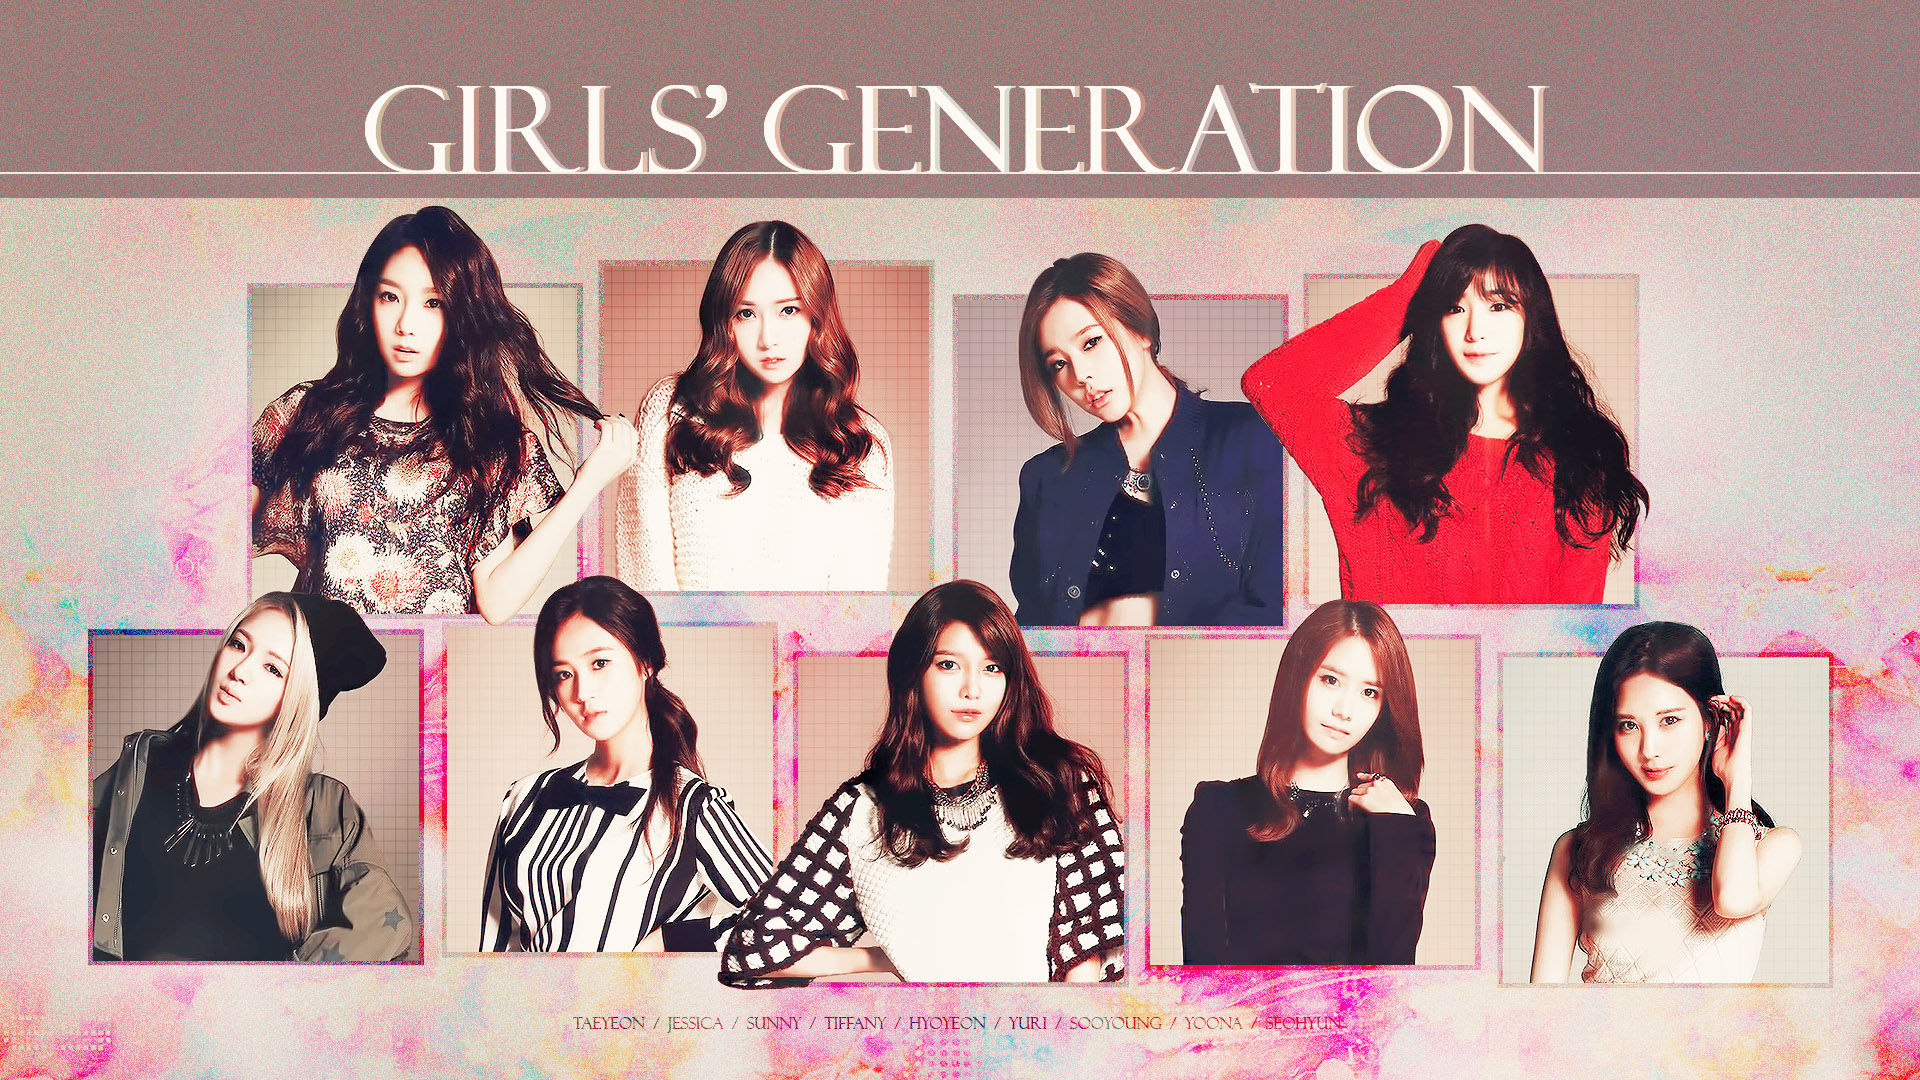 Generation Snsd Image Wallpaper HD And Background